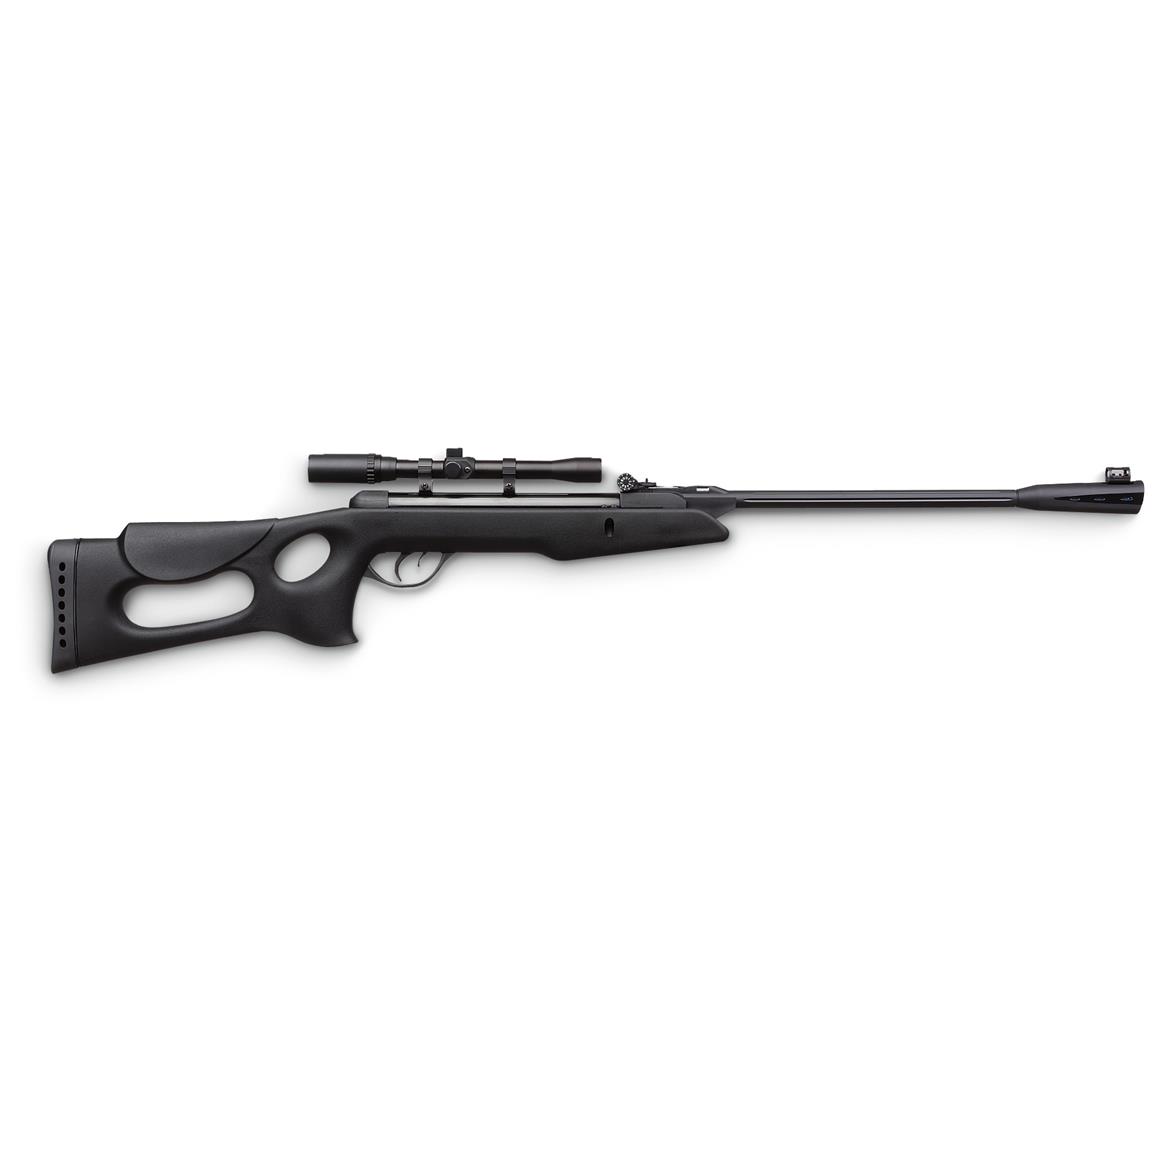  Gamo   Recon Whisper  177 Air Rifle  with 4x20mm Scope 